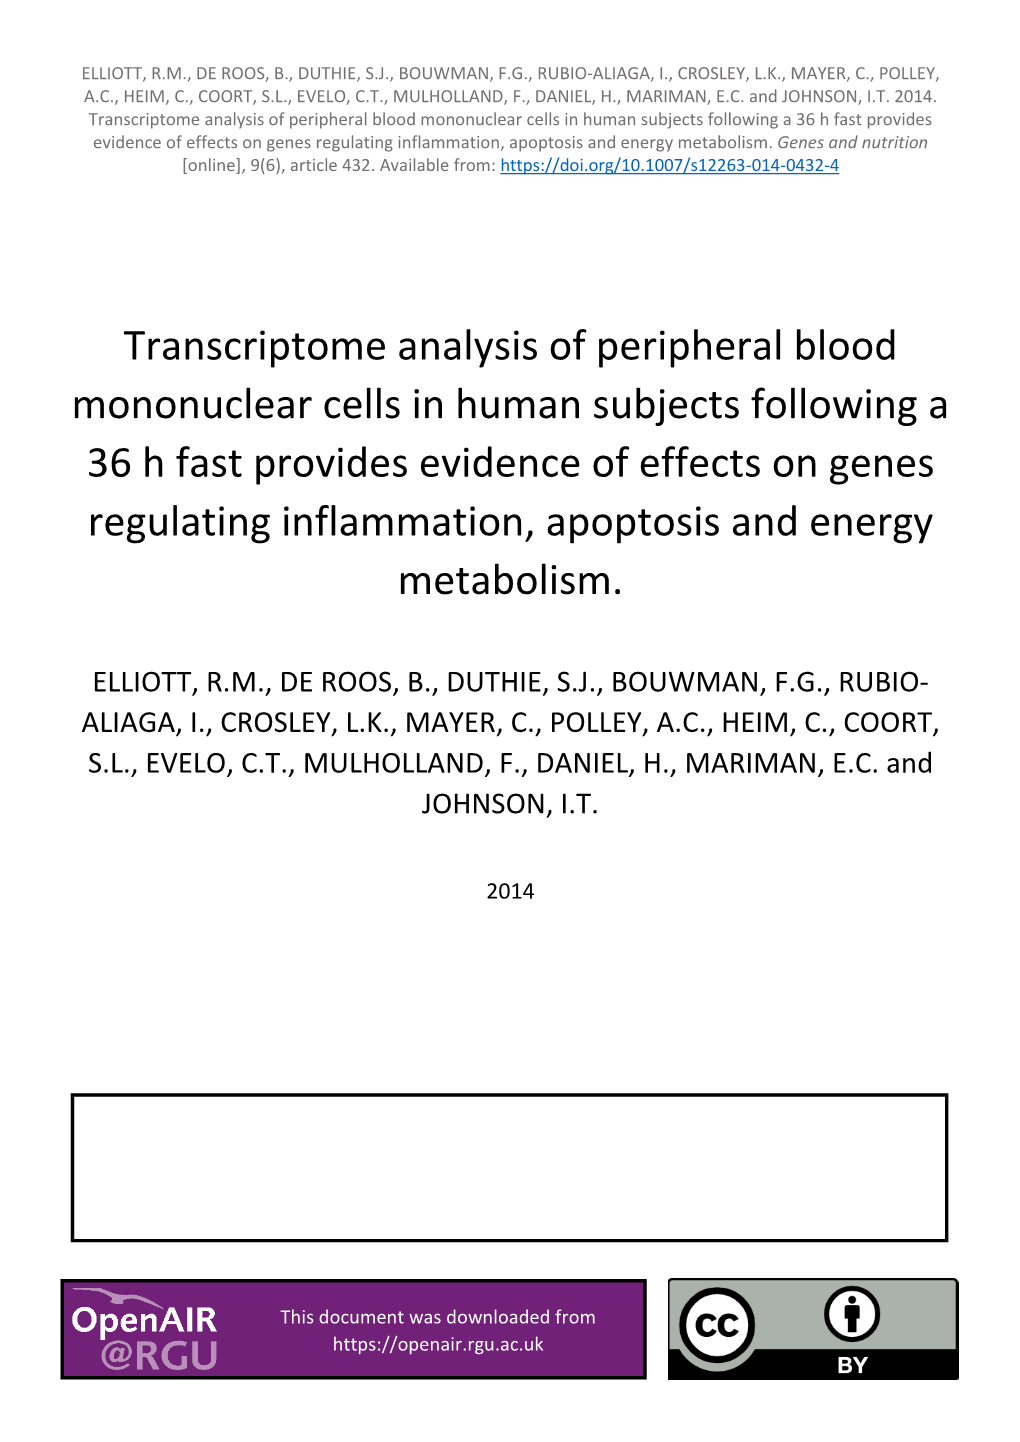 Transcriptome Analysis of Peripheral Blood Mononuclear Cells in Human